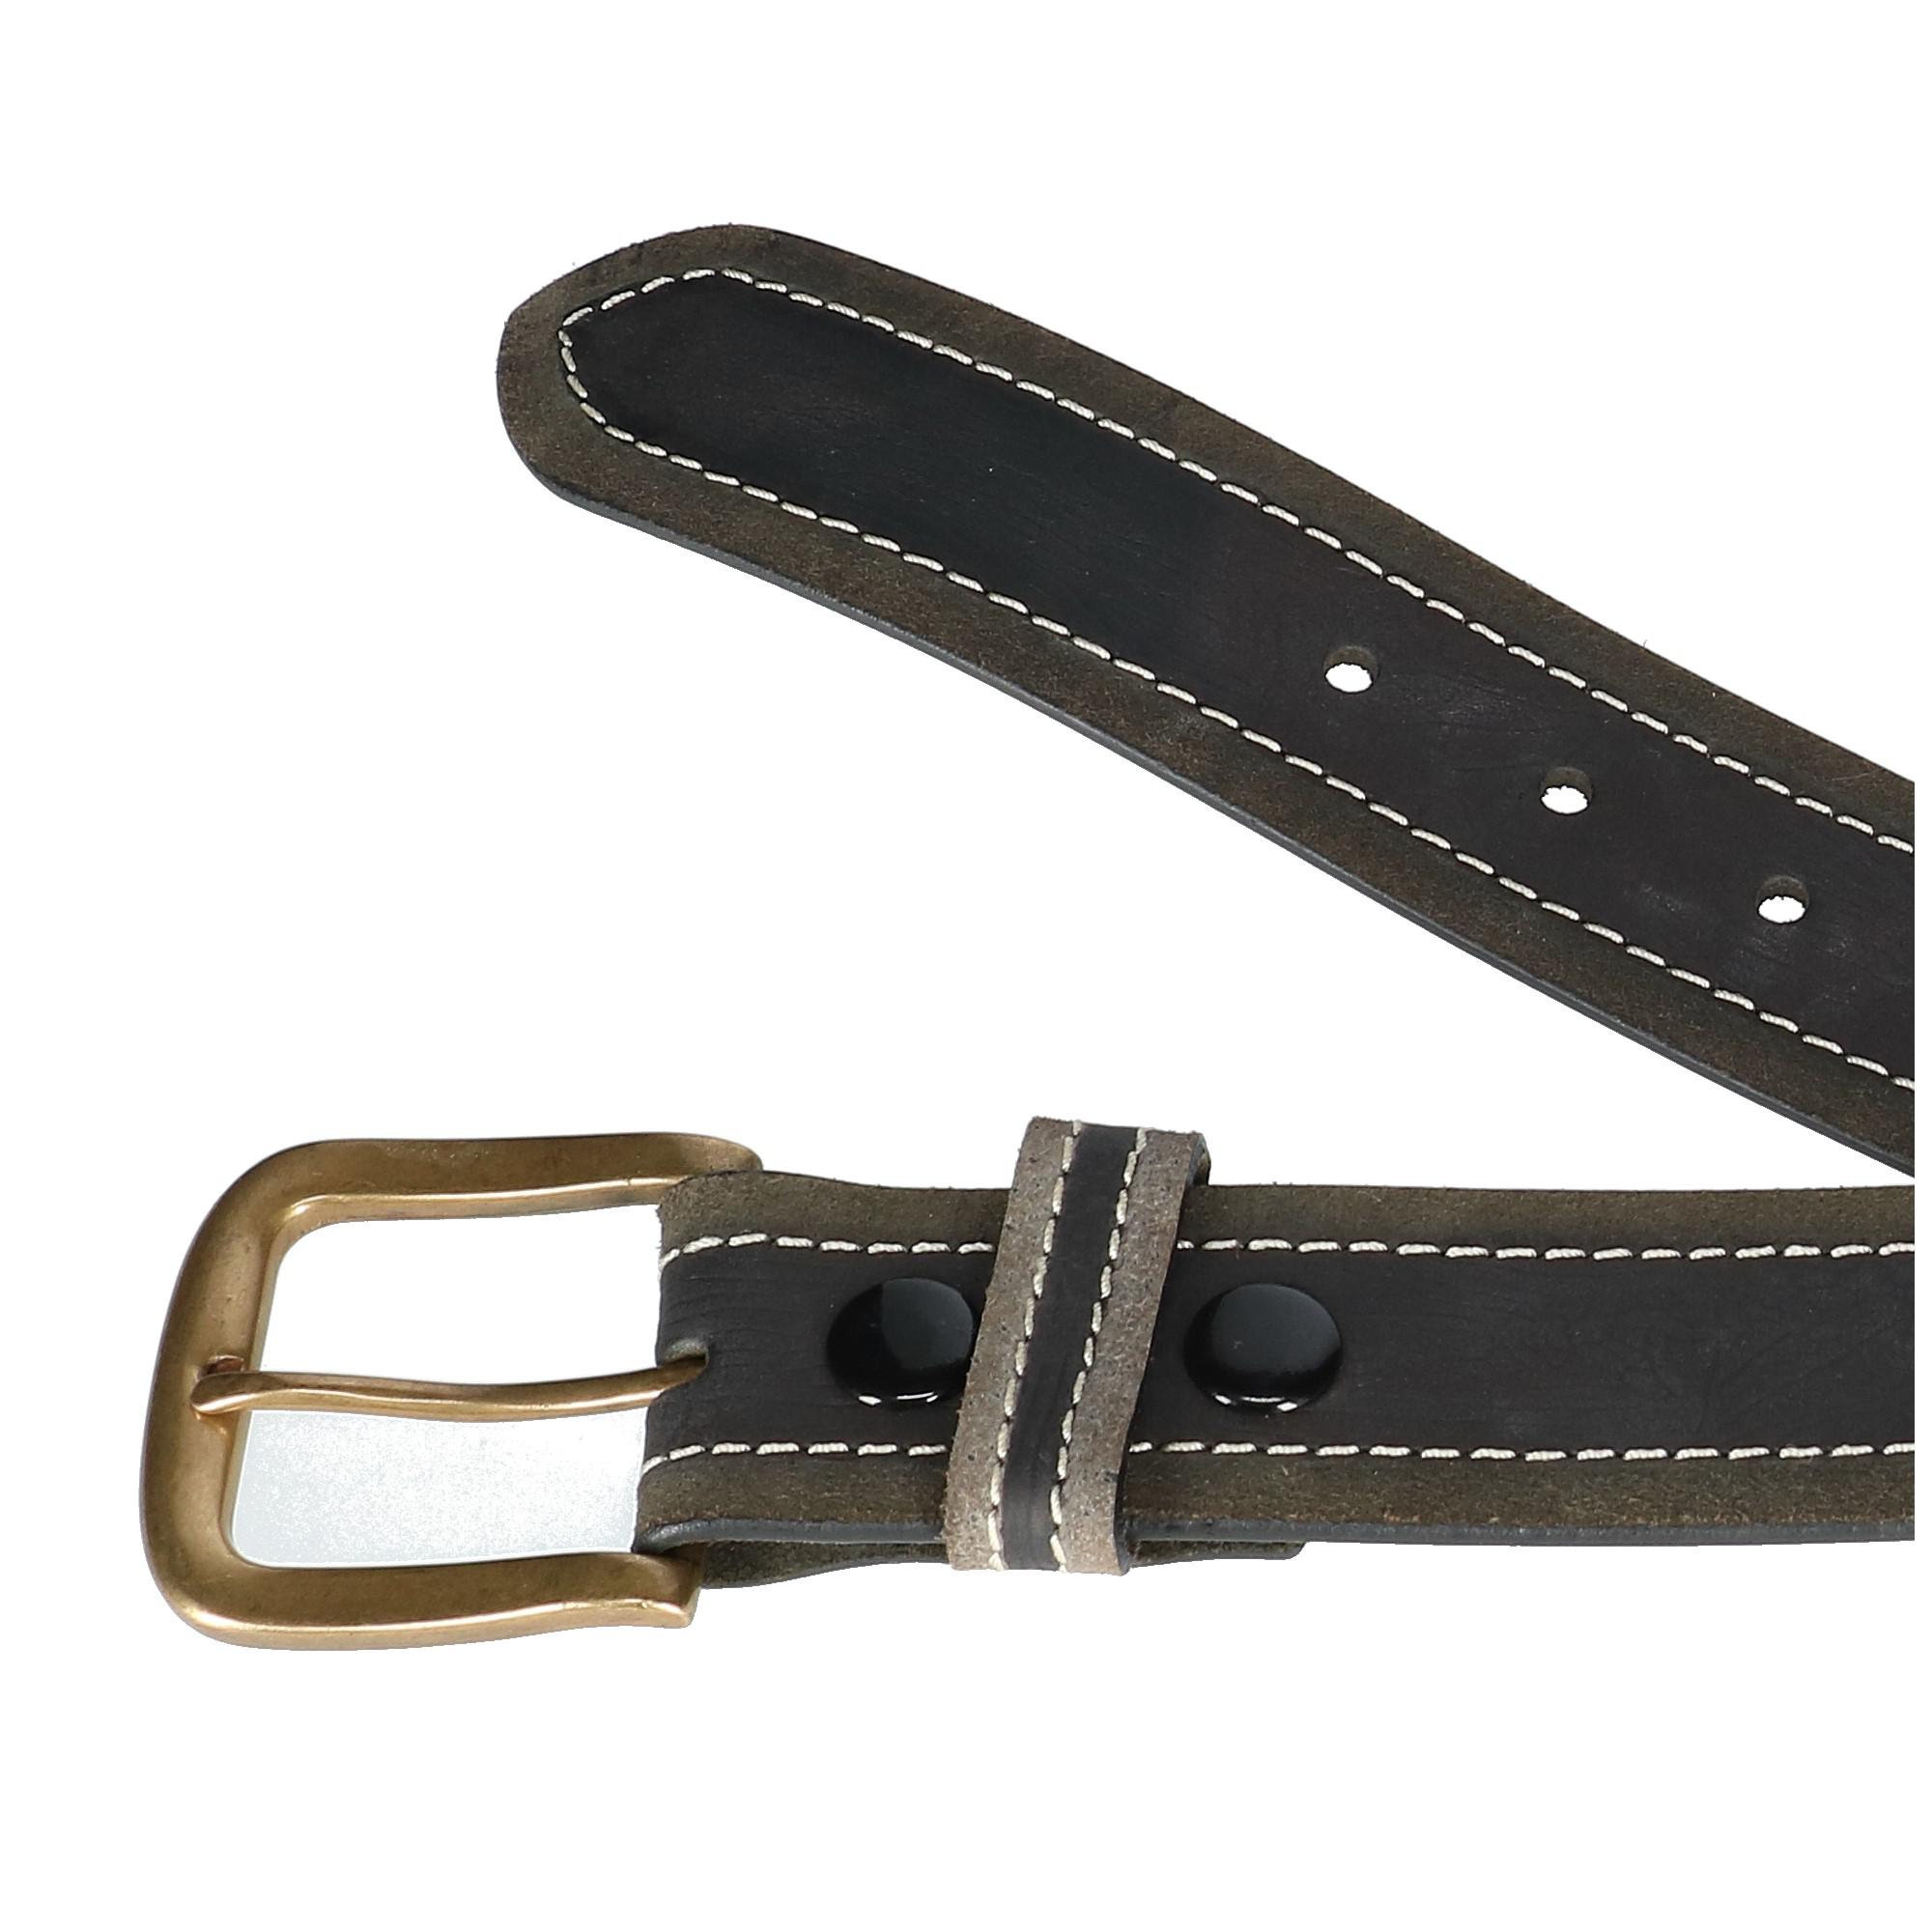 Paul & Taylor Mens Two Tone Bridle Belt with Removable Buckle